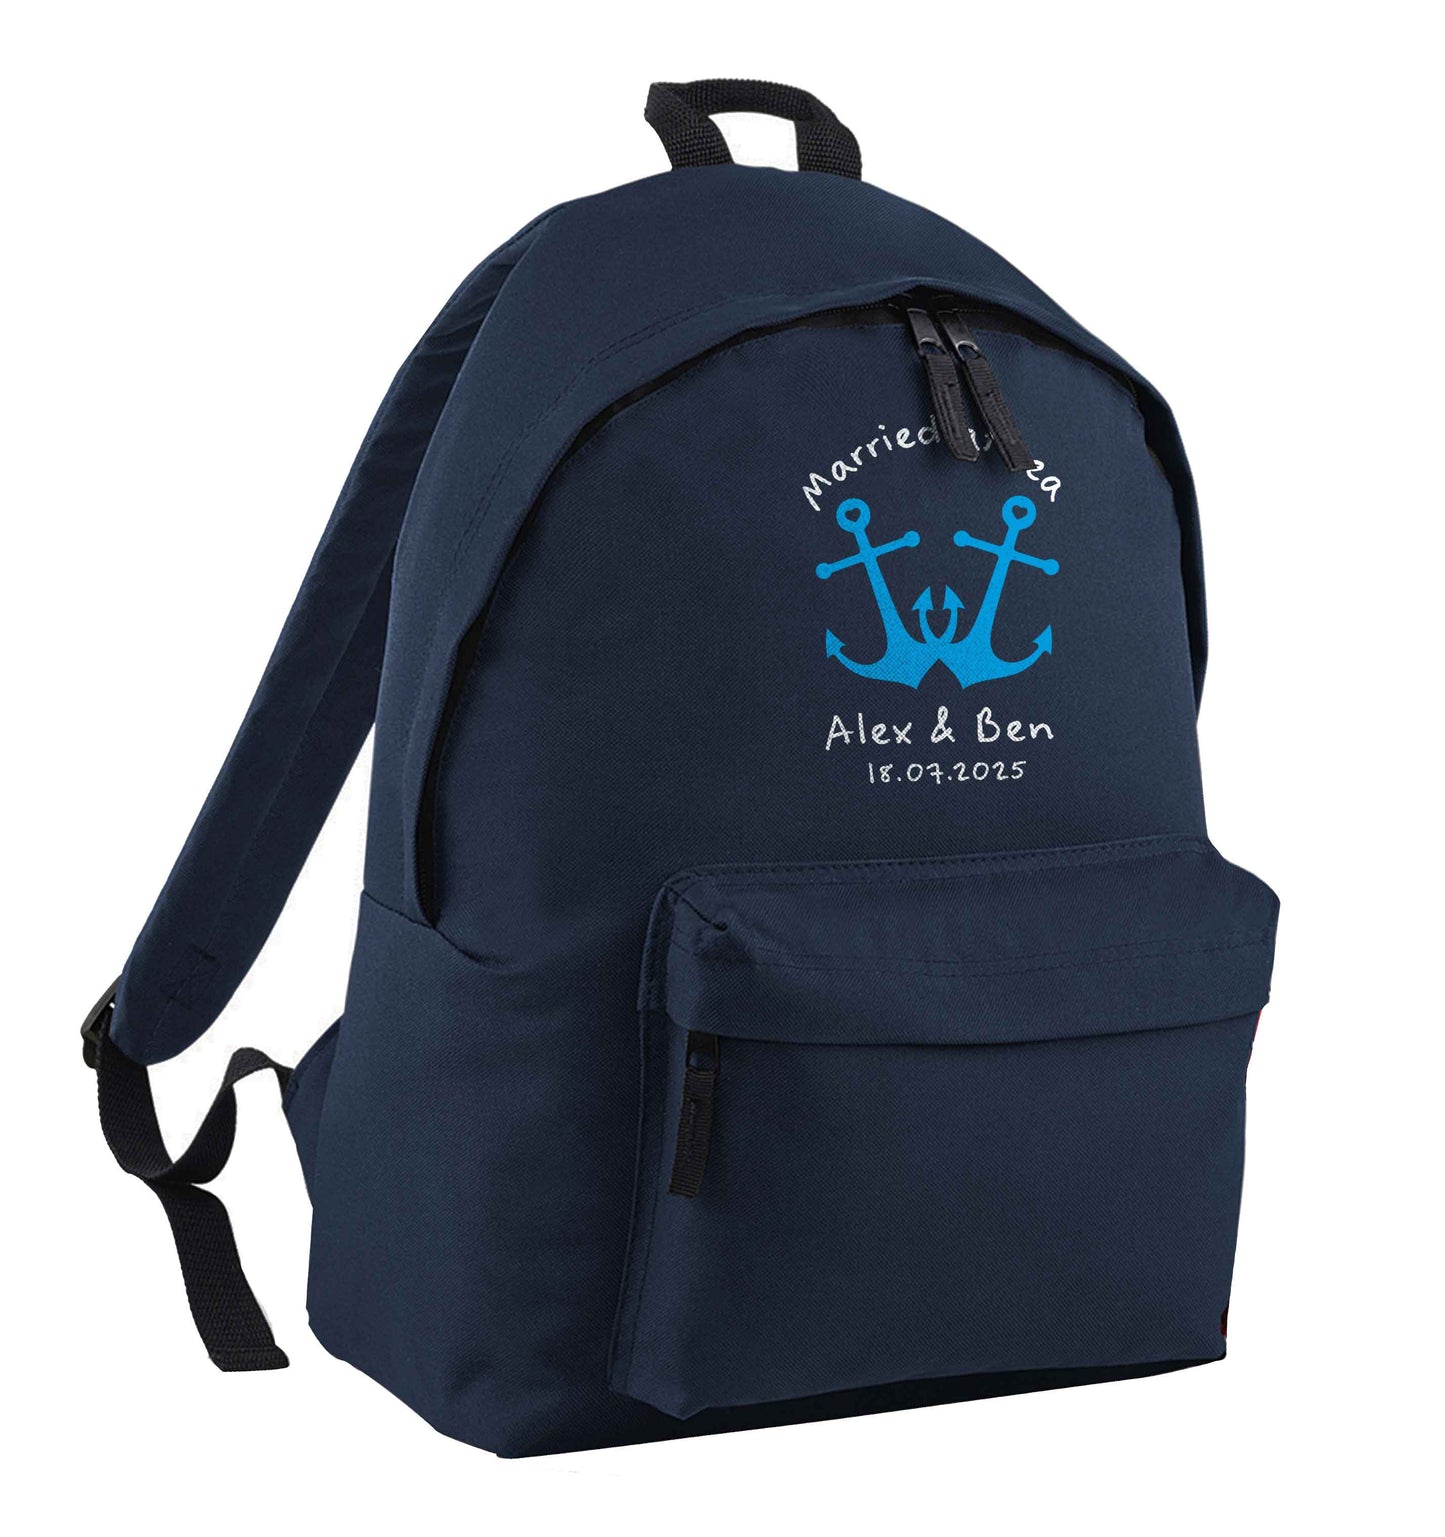 Married at sea blue anchors navy adults backpack